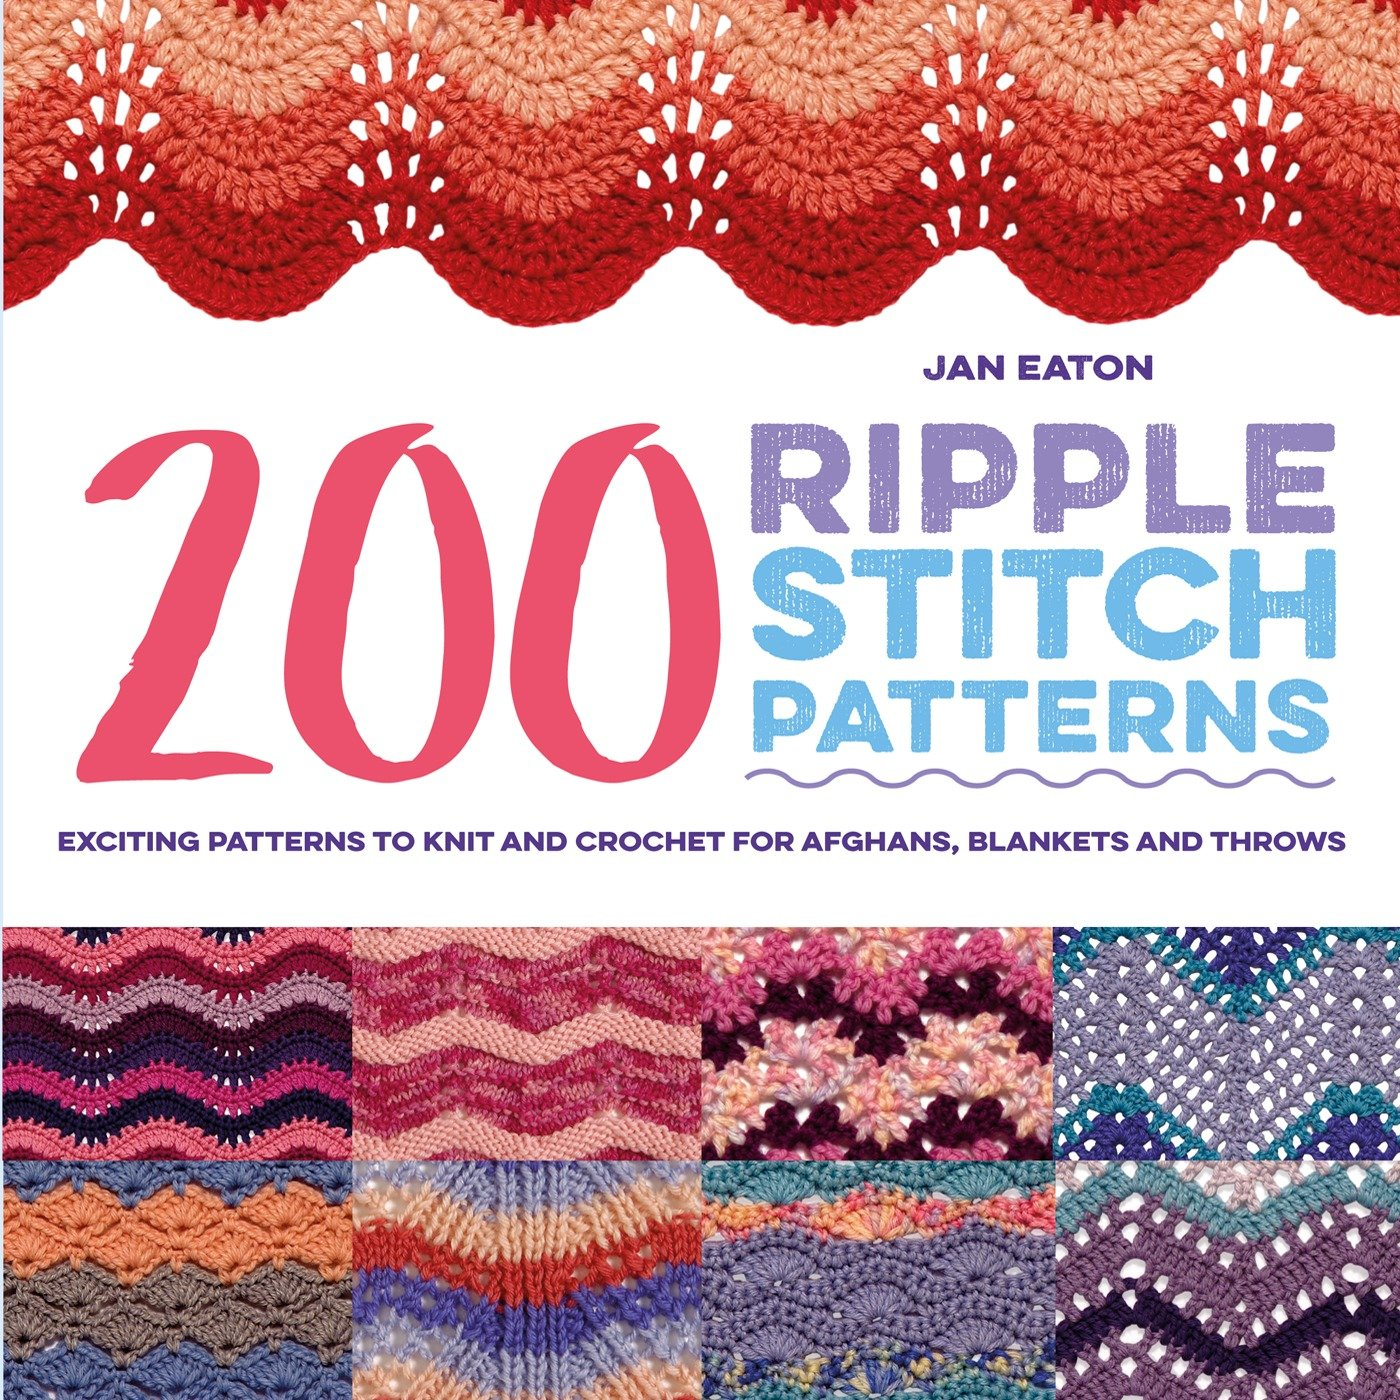 Patterns To Knit 200 Ripple Stitch Patterns Exciting Patterns To Knit And Crochet For Afghans Blankets And Throws